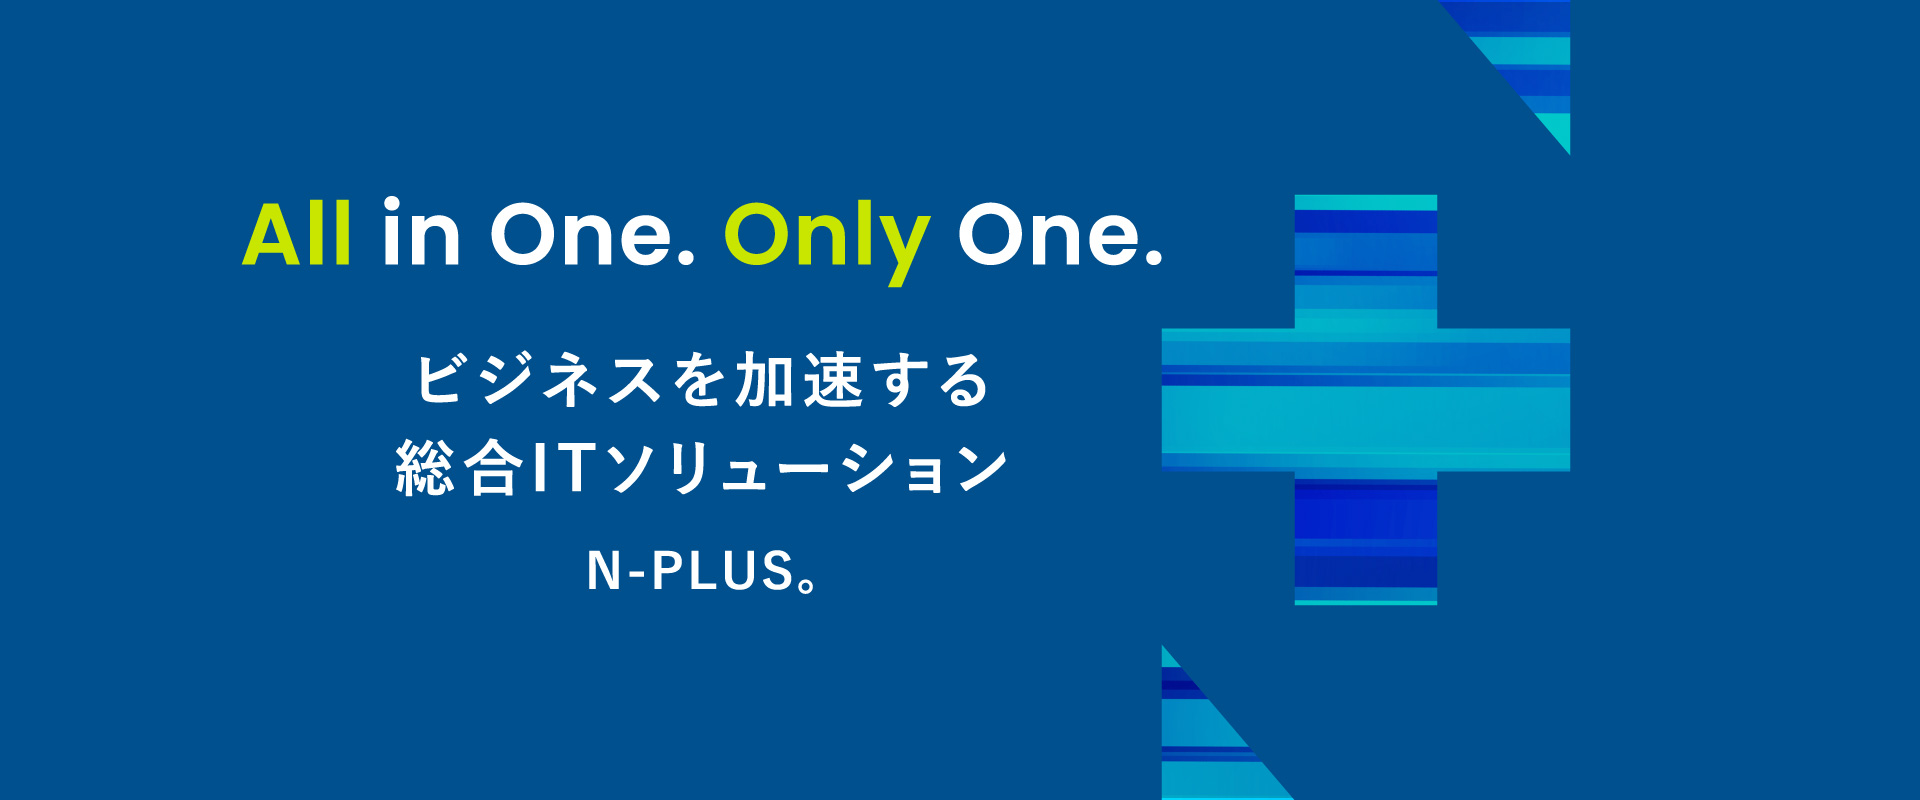 All in One. Only One.ビジネスを加速する 総合ITソリューションN-PLUS。